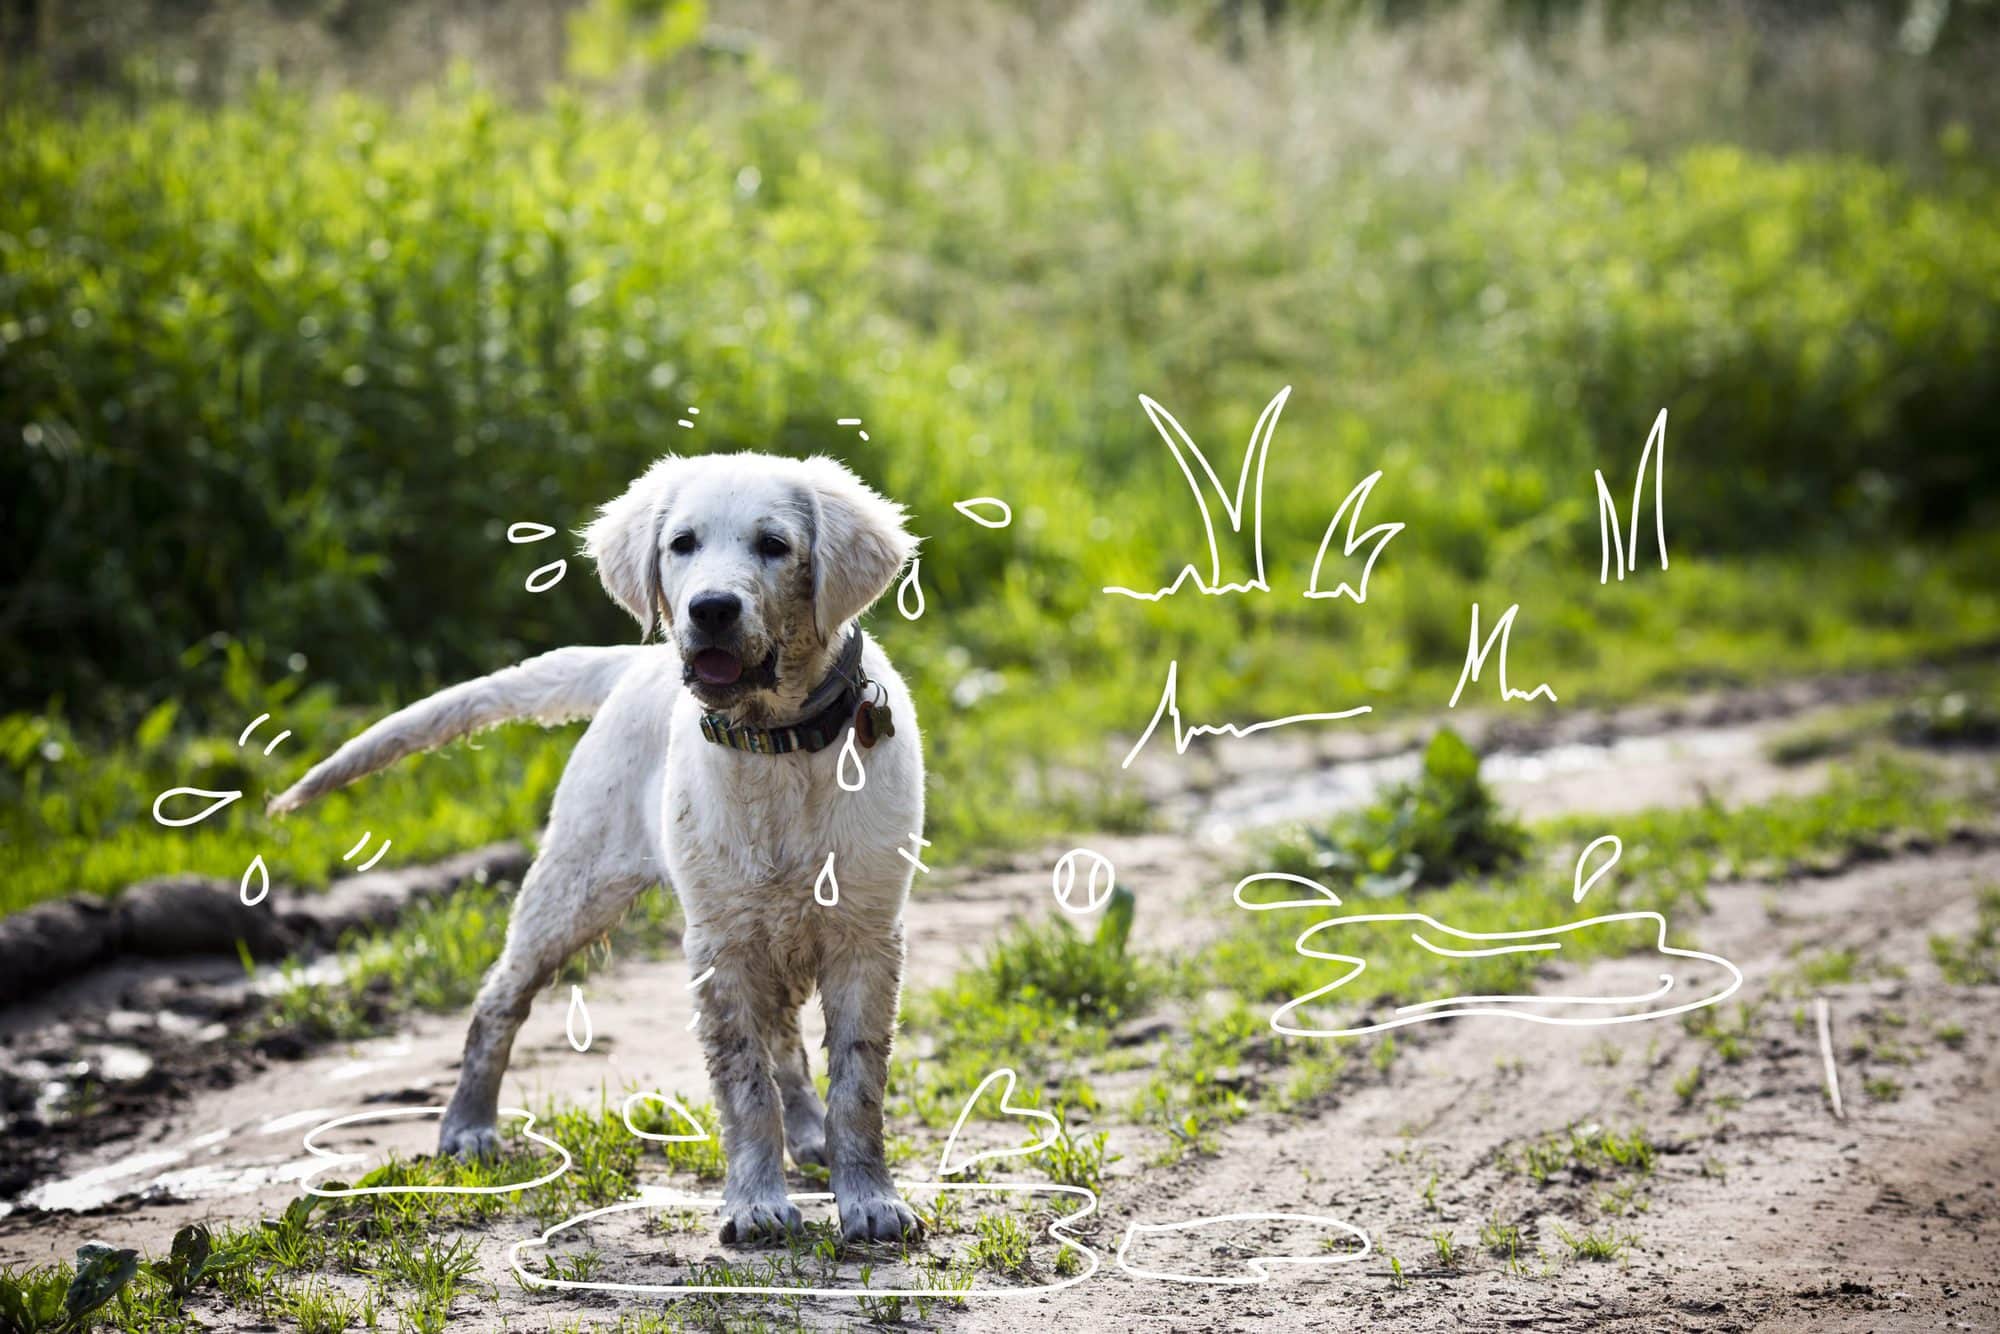 Why do dogs wag their tails? A muddy dog outdoors.